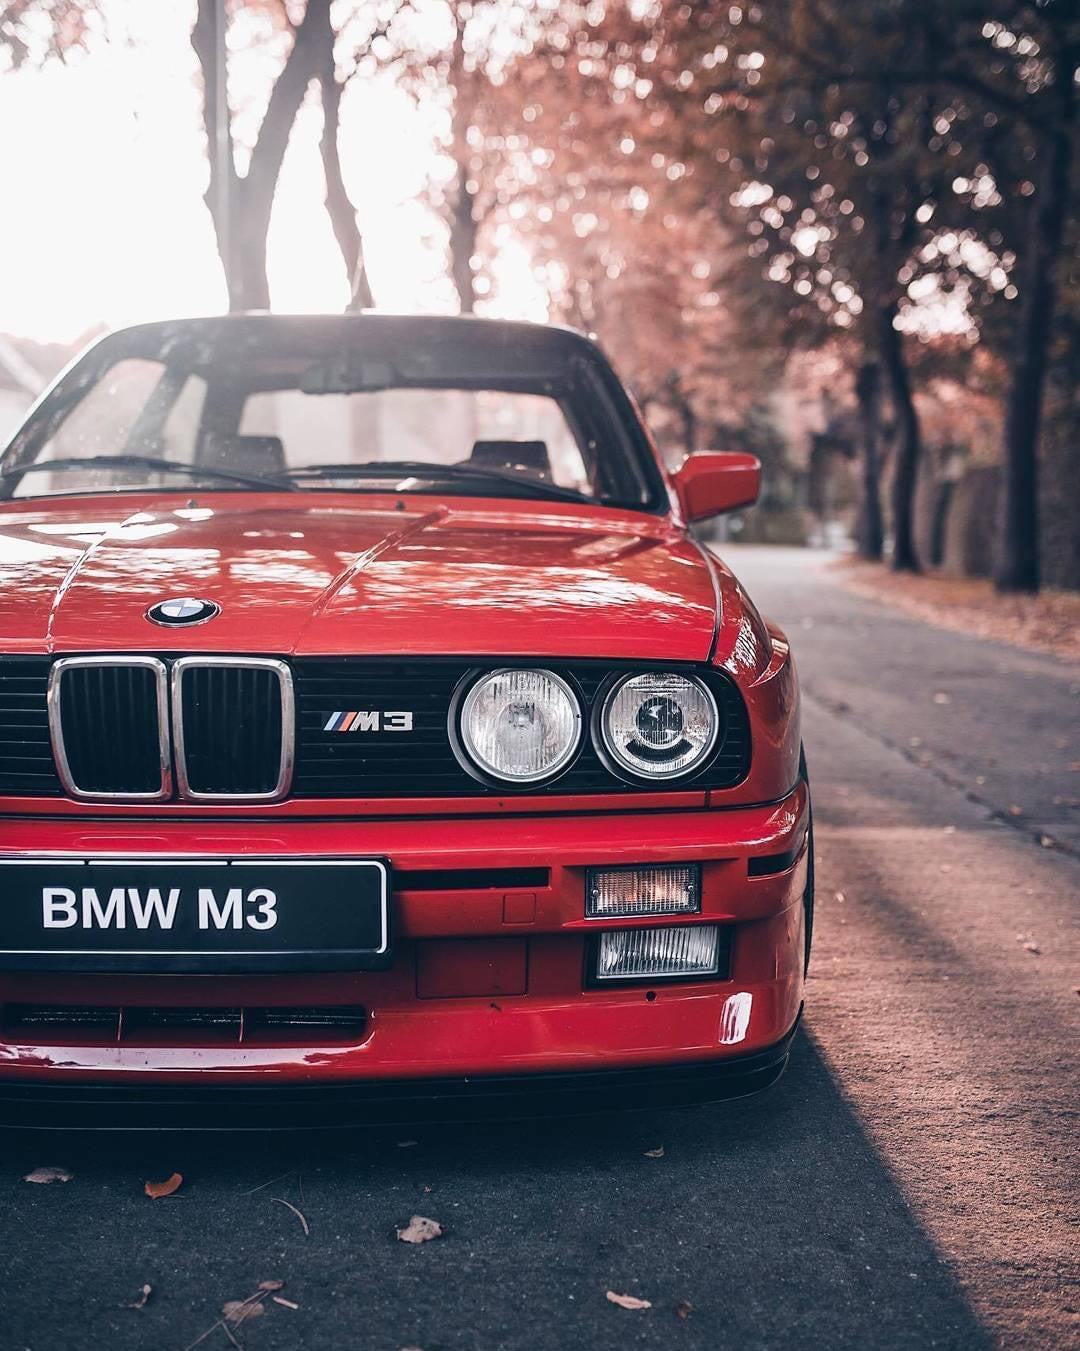 Bmw E30 M3 A Look Into Its History And Legacy